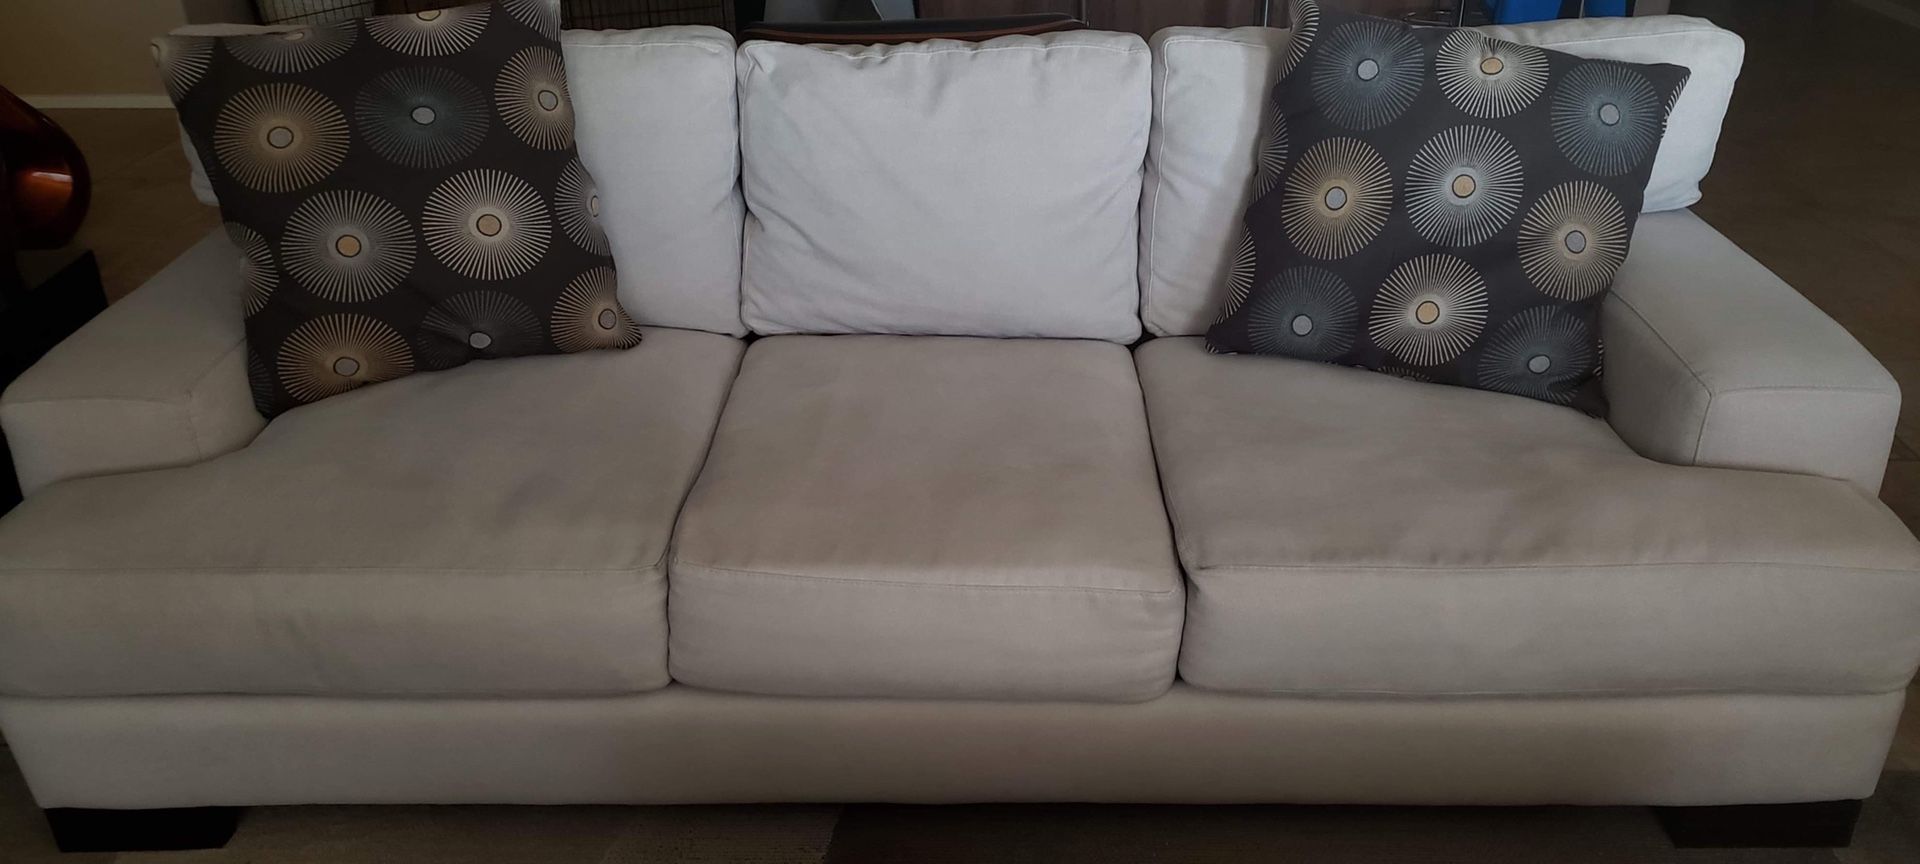 Thomasville Sofa with down cushions